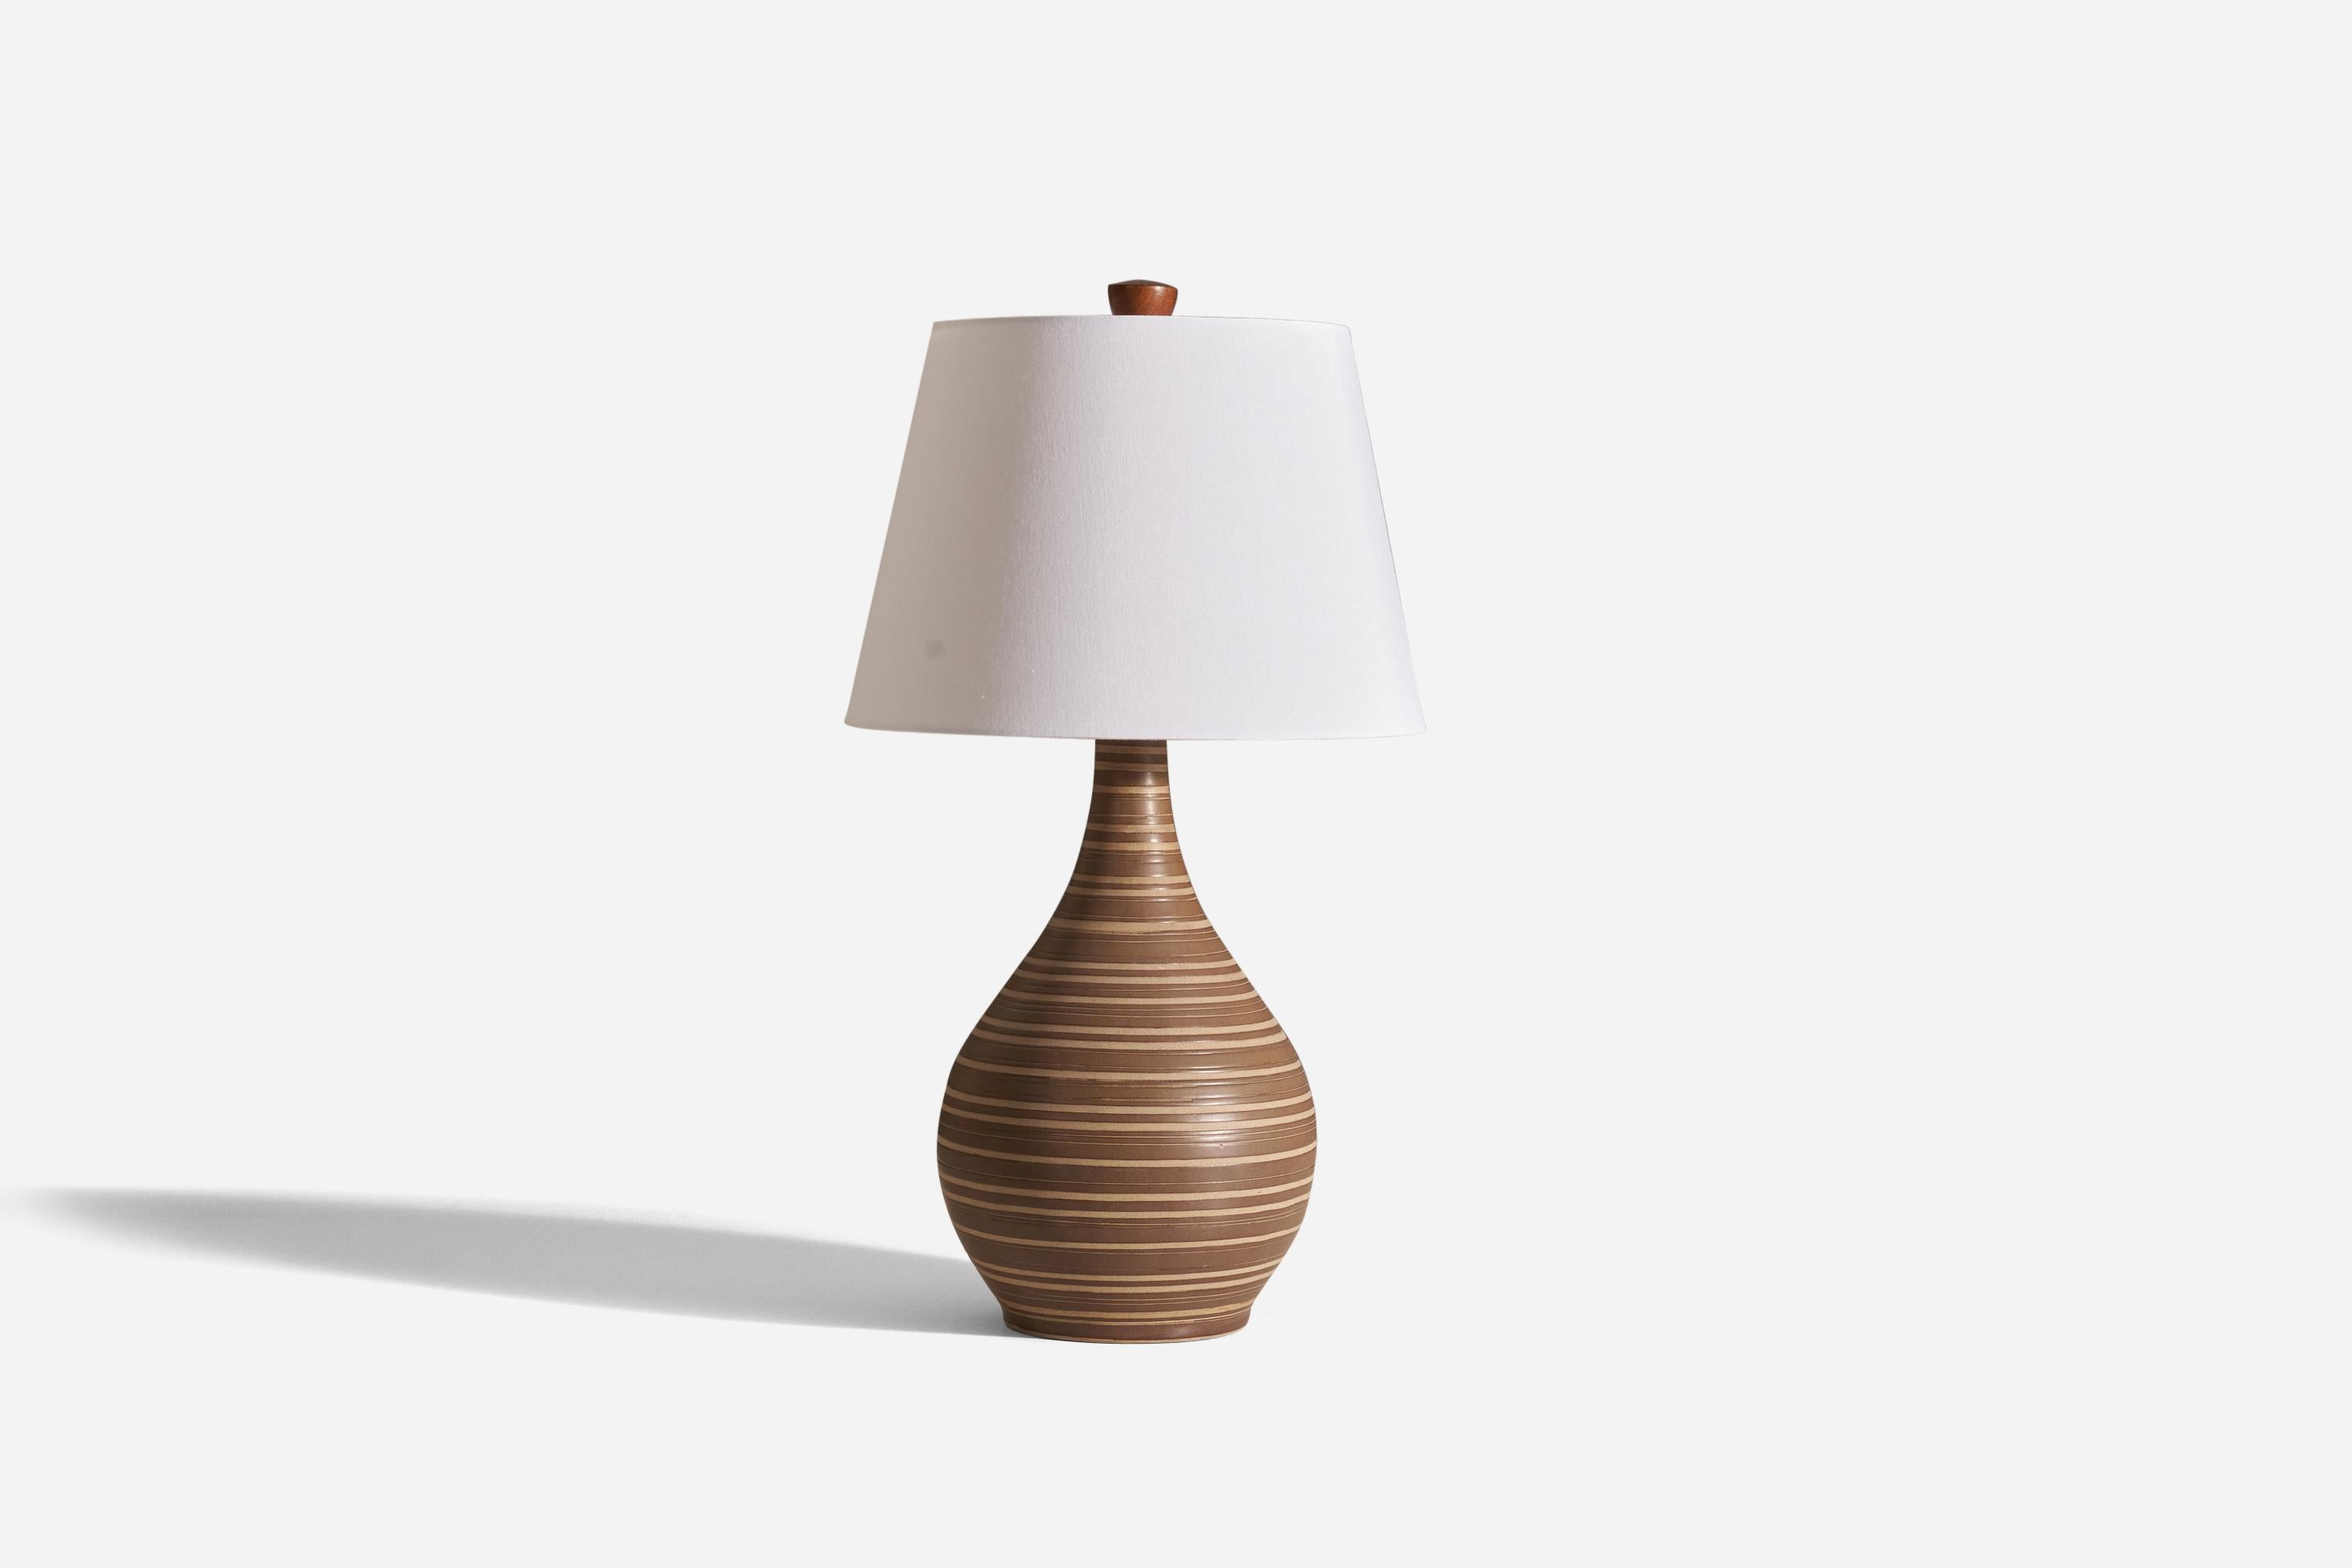 A table lamp designed by husband and wife duo Jane & Gordon Martz. It was produced by Marshall Studios in Indianapolis. 

The base is slip-cast, then dipped into a glaze, and hand-painted. The design also incorporates an exquisite walnut neck and